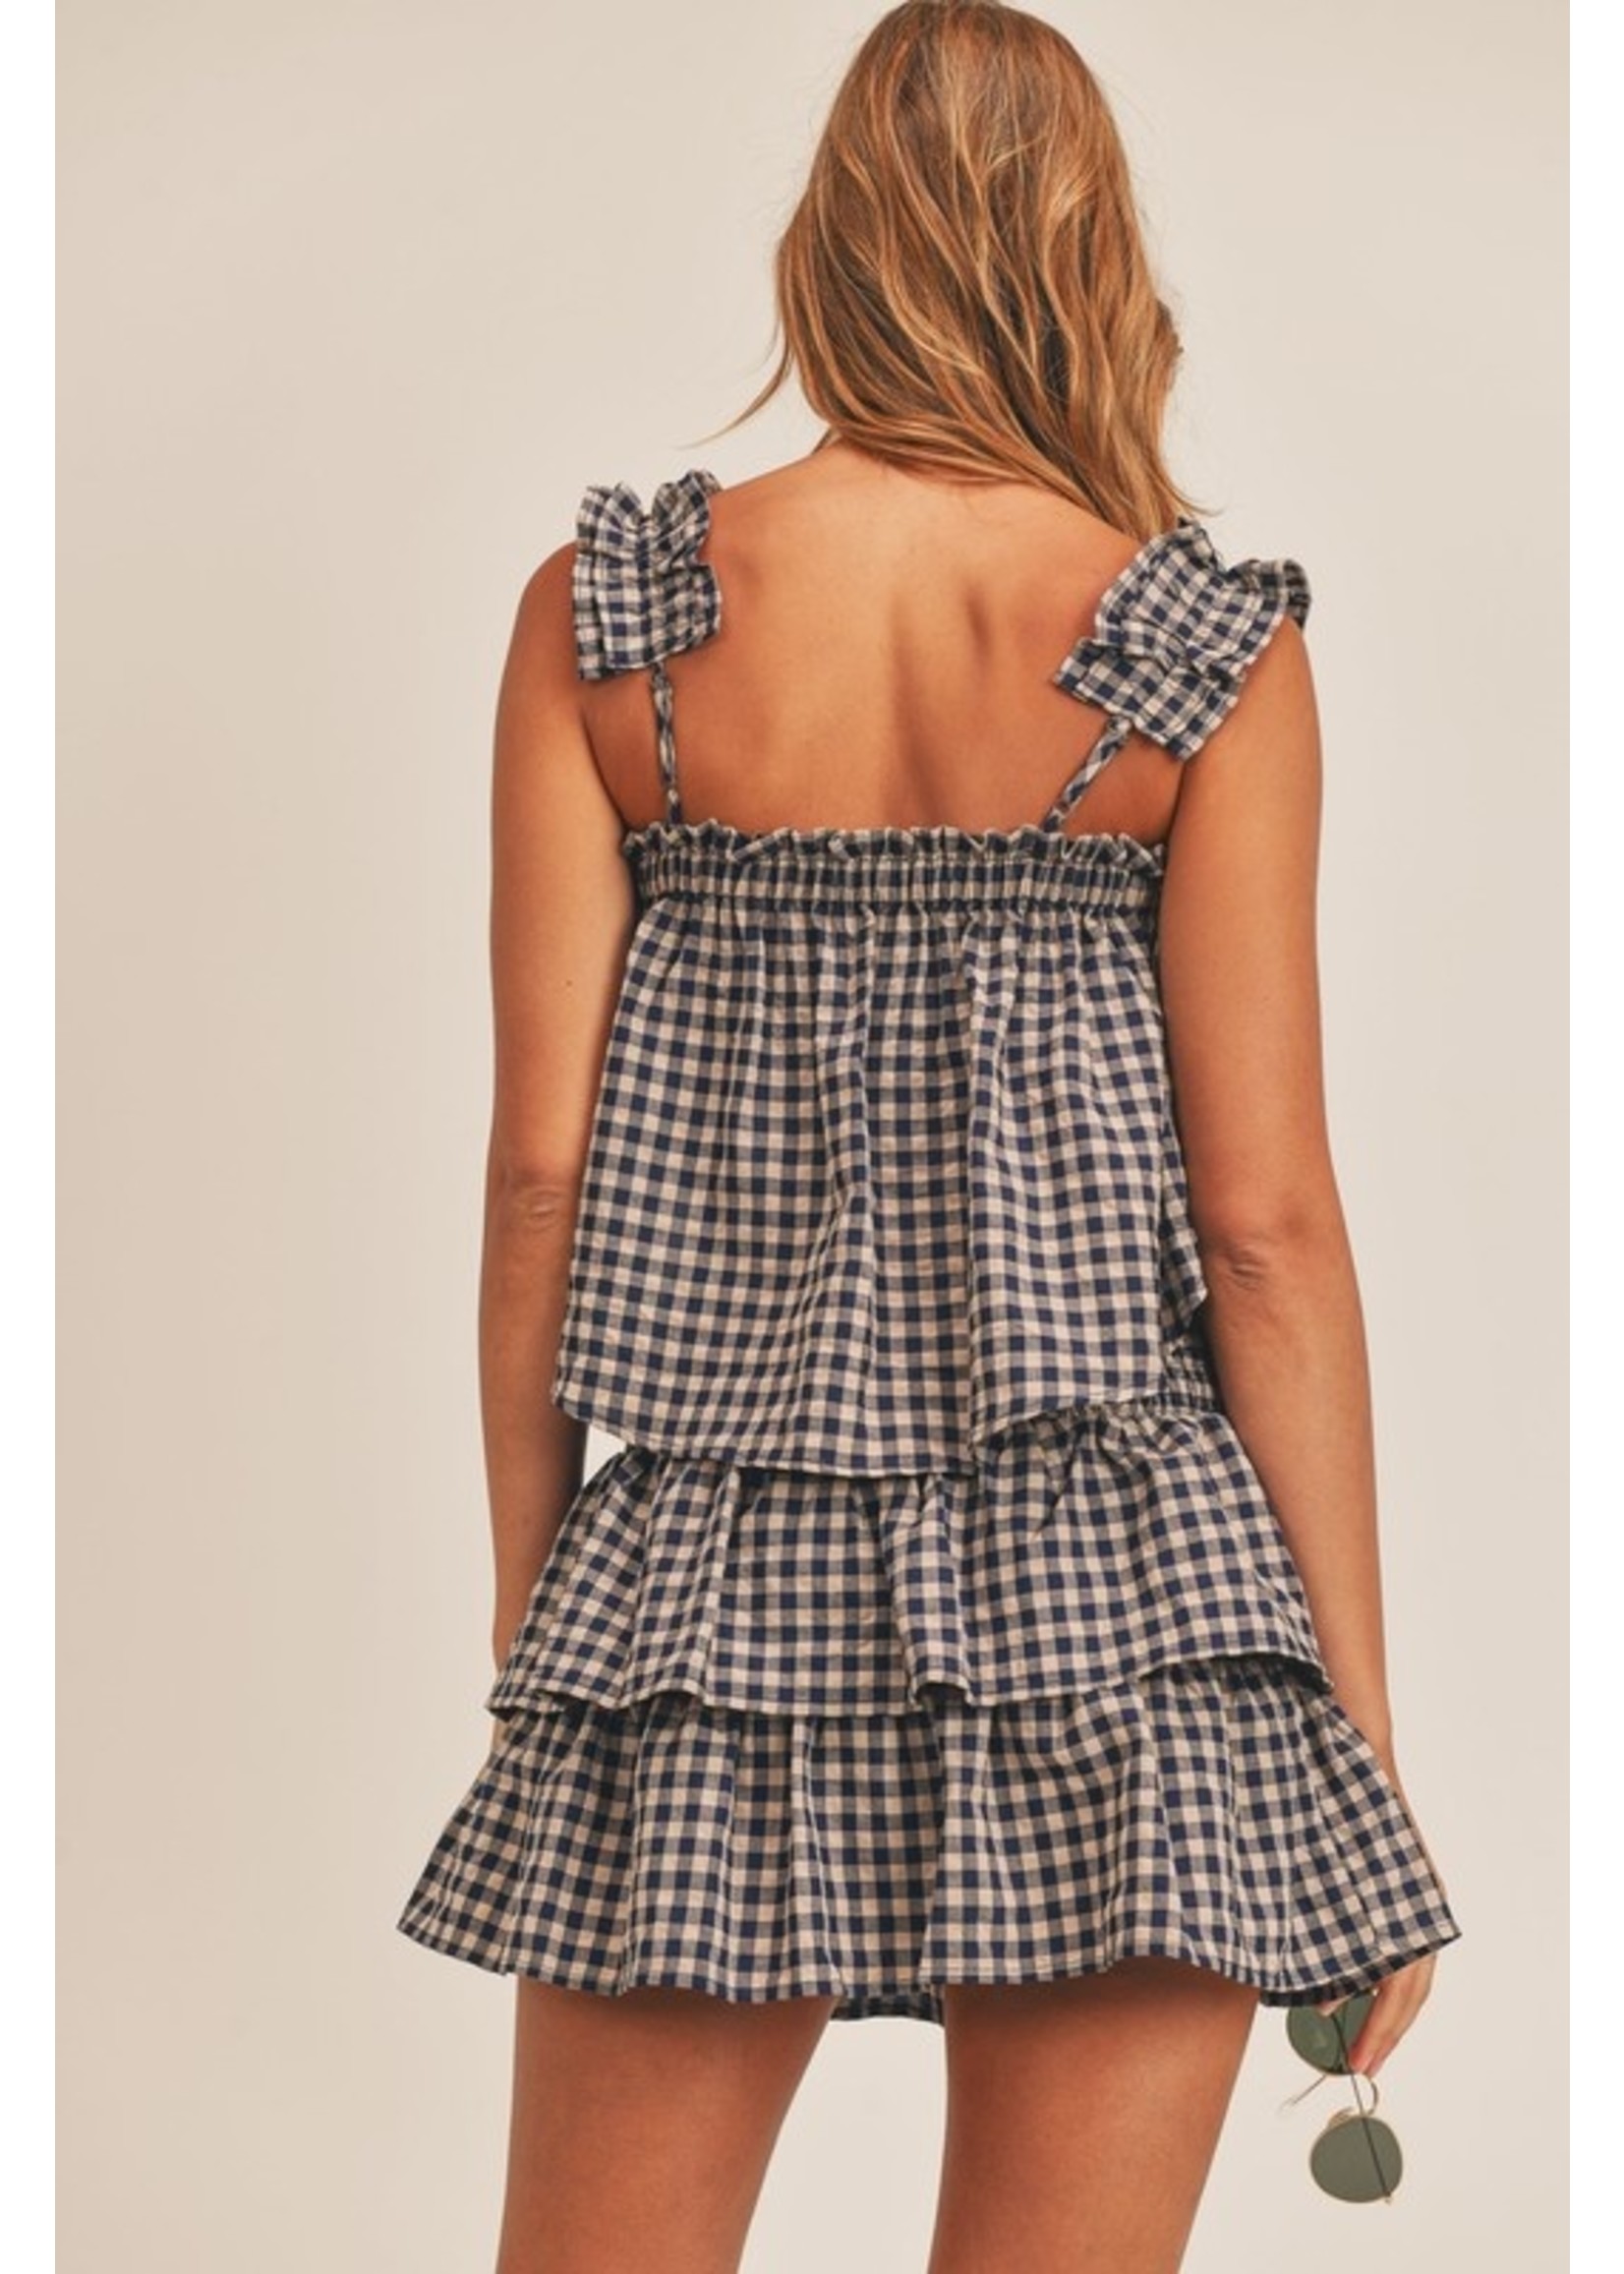 Mable Gingham Plaid Crop Top Ruffle Detail Top and Mini Skirt Set - MT7080CSET